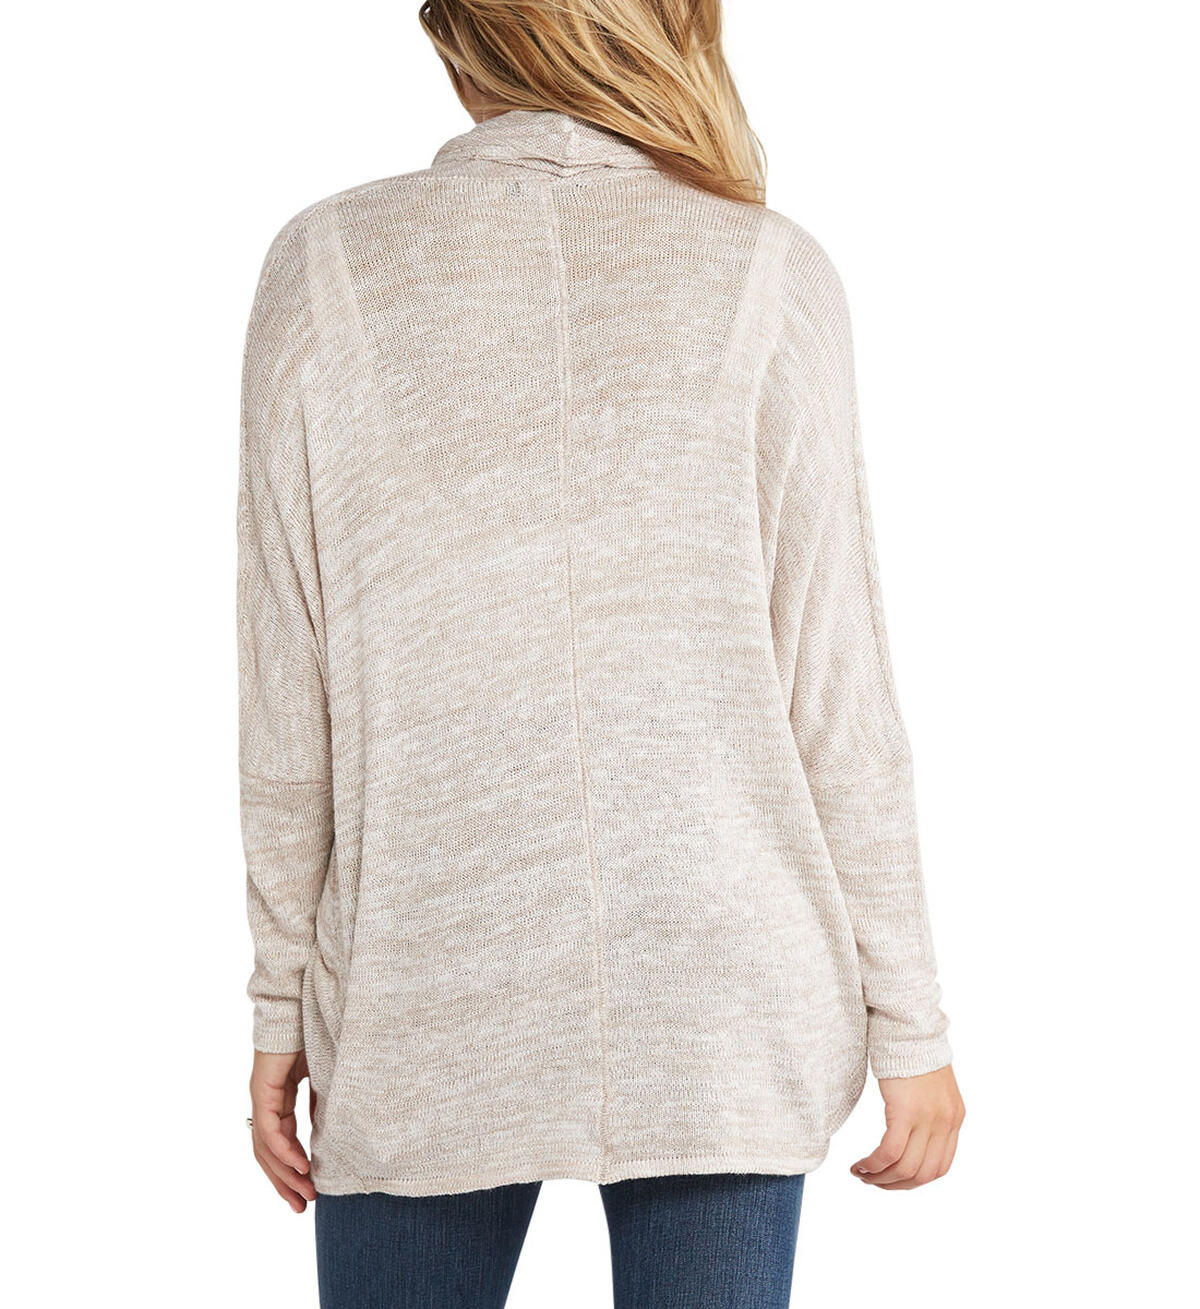 Dolman Wrapped Sweater, , hi-res image number 1